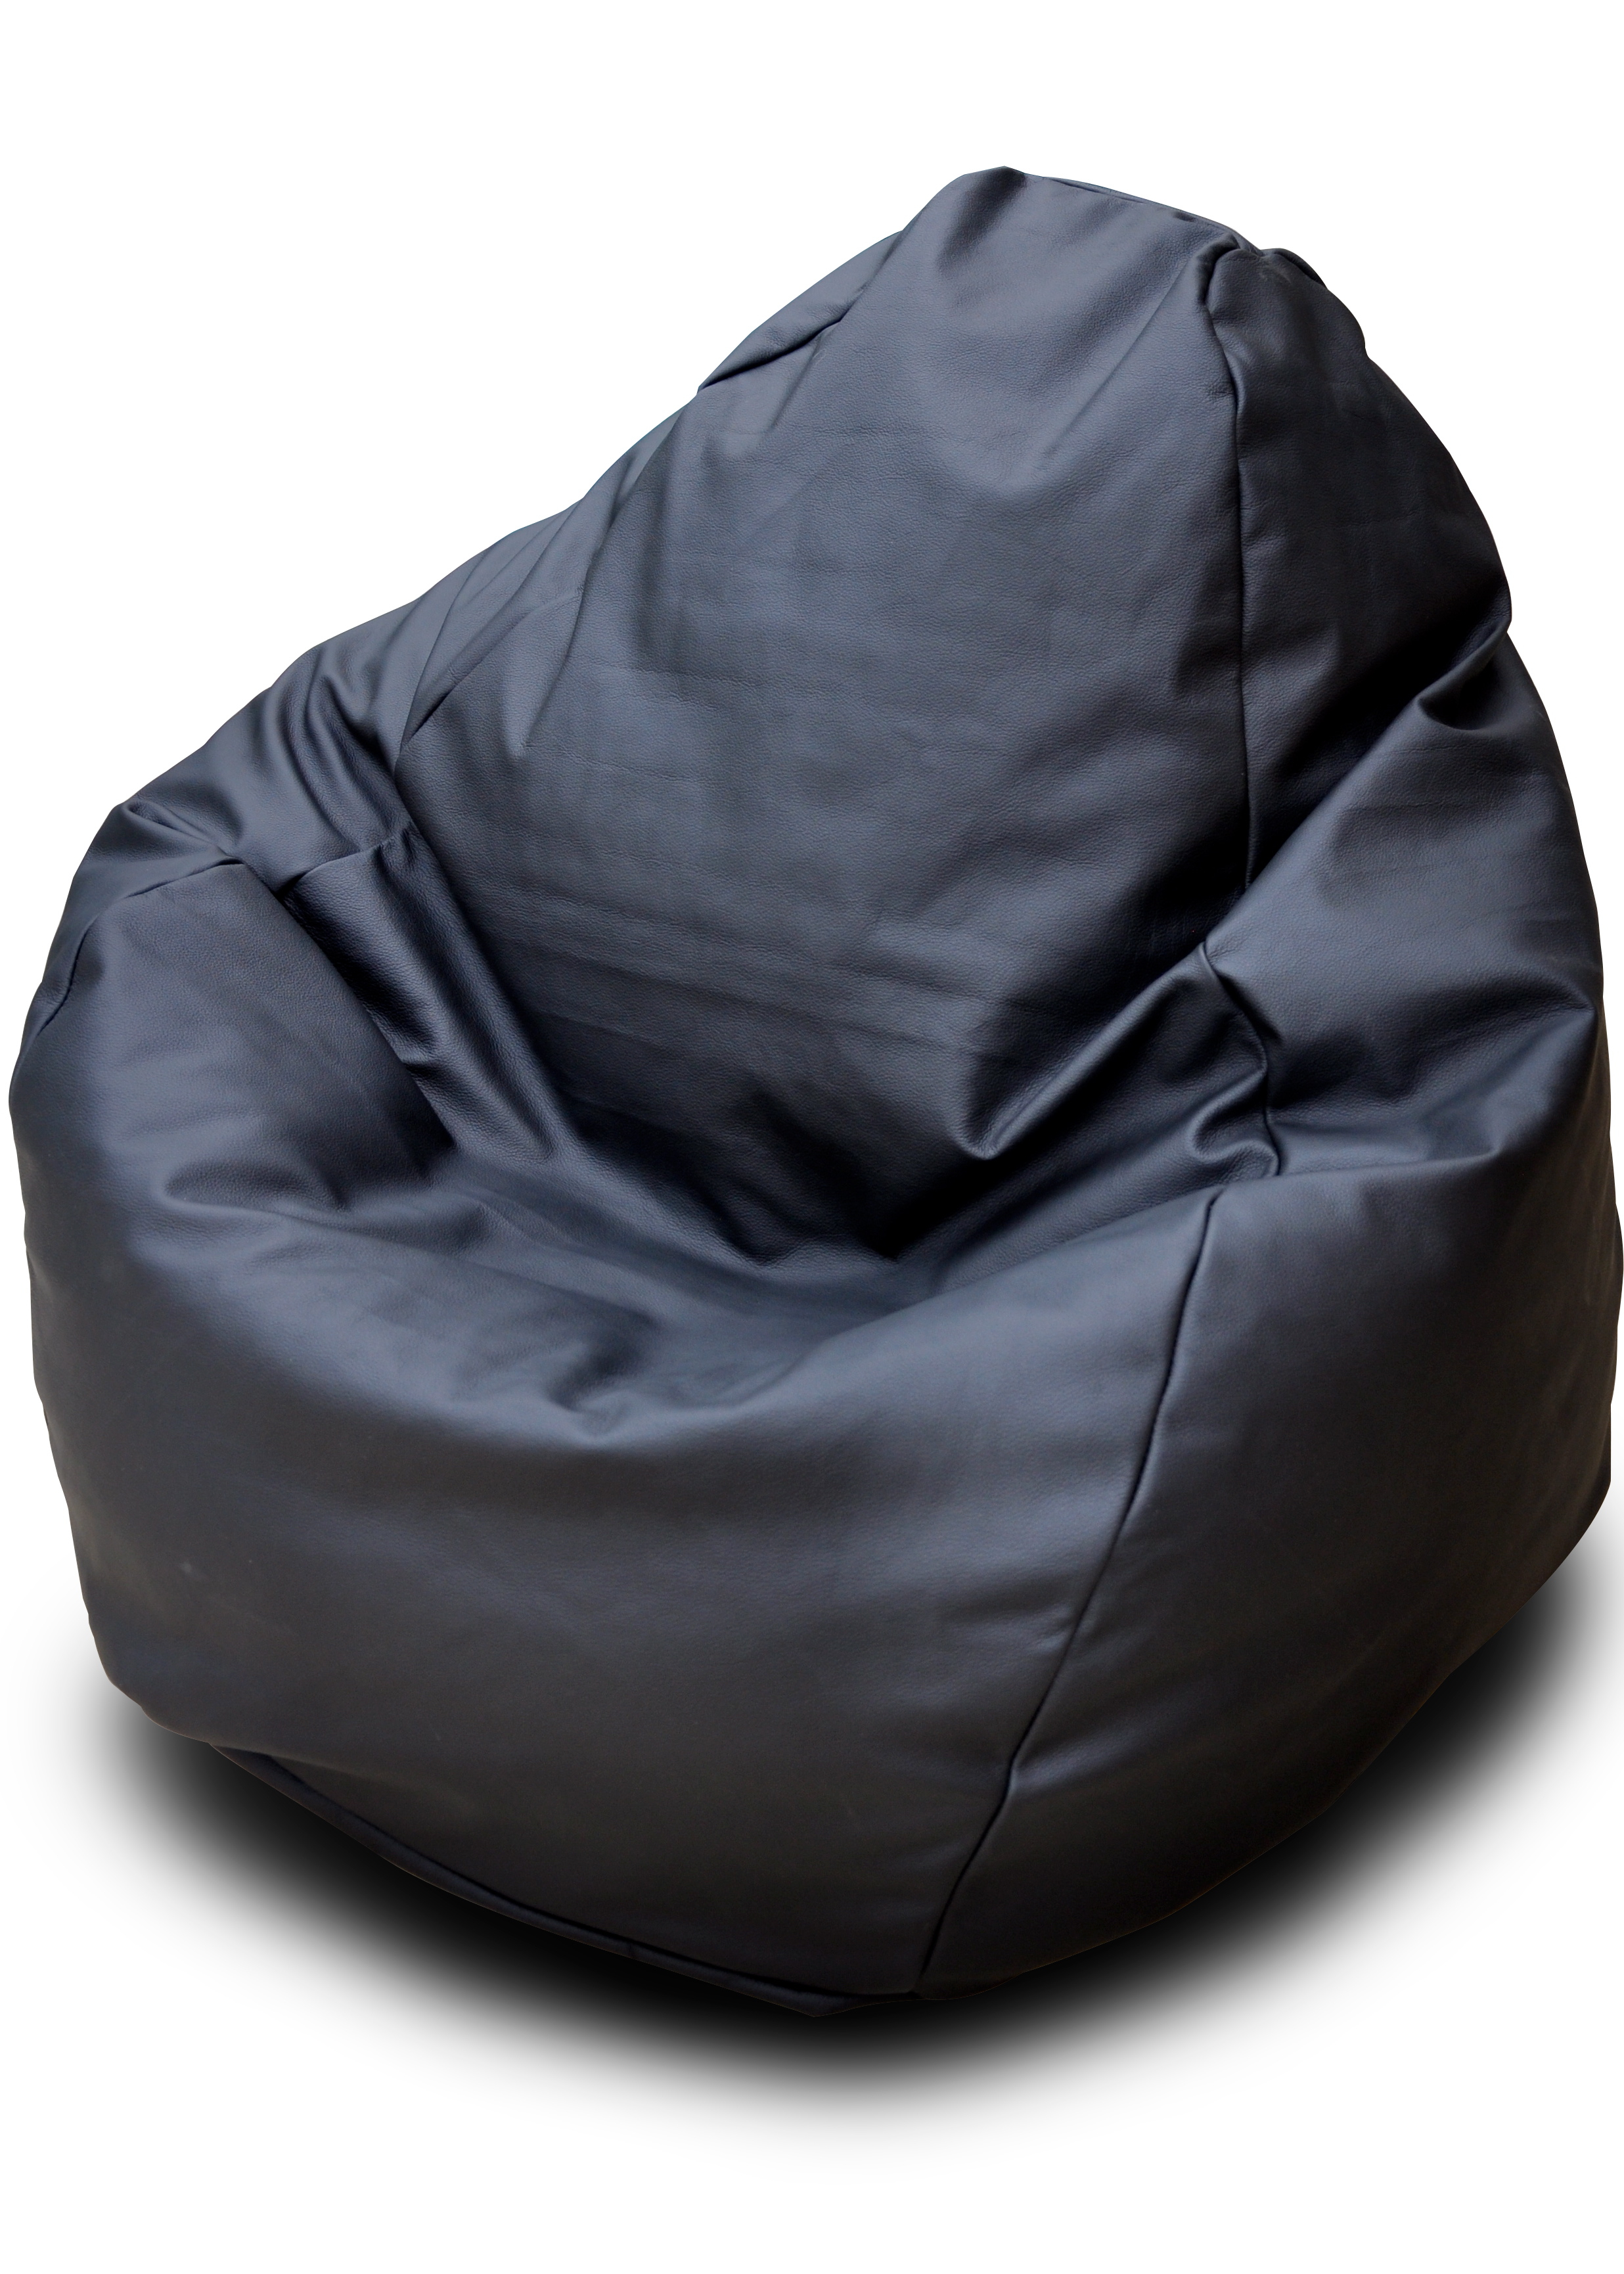 Epona Co Beanbags: Designer Bean Bags for Outdoor and